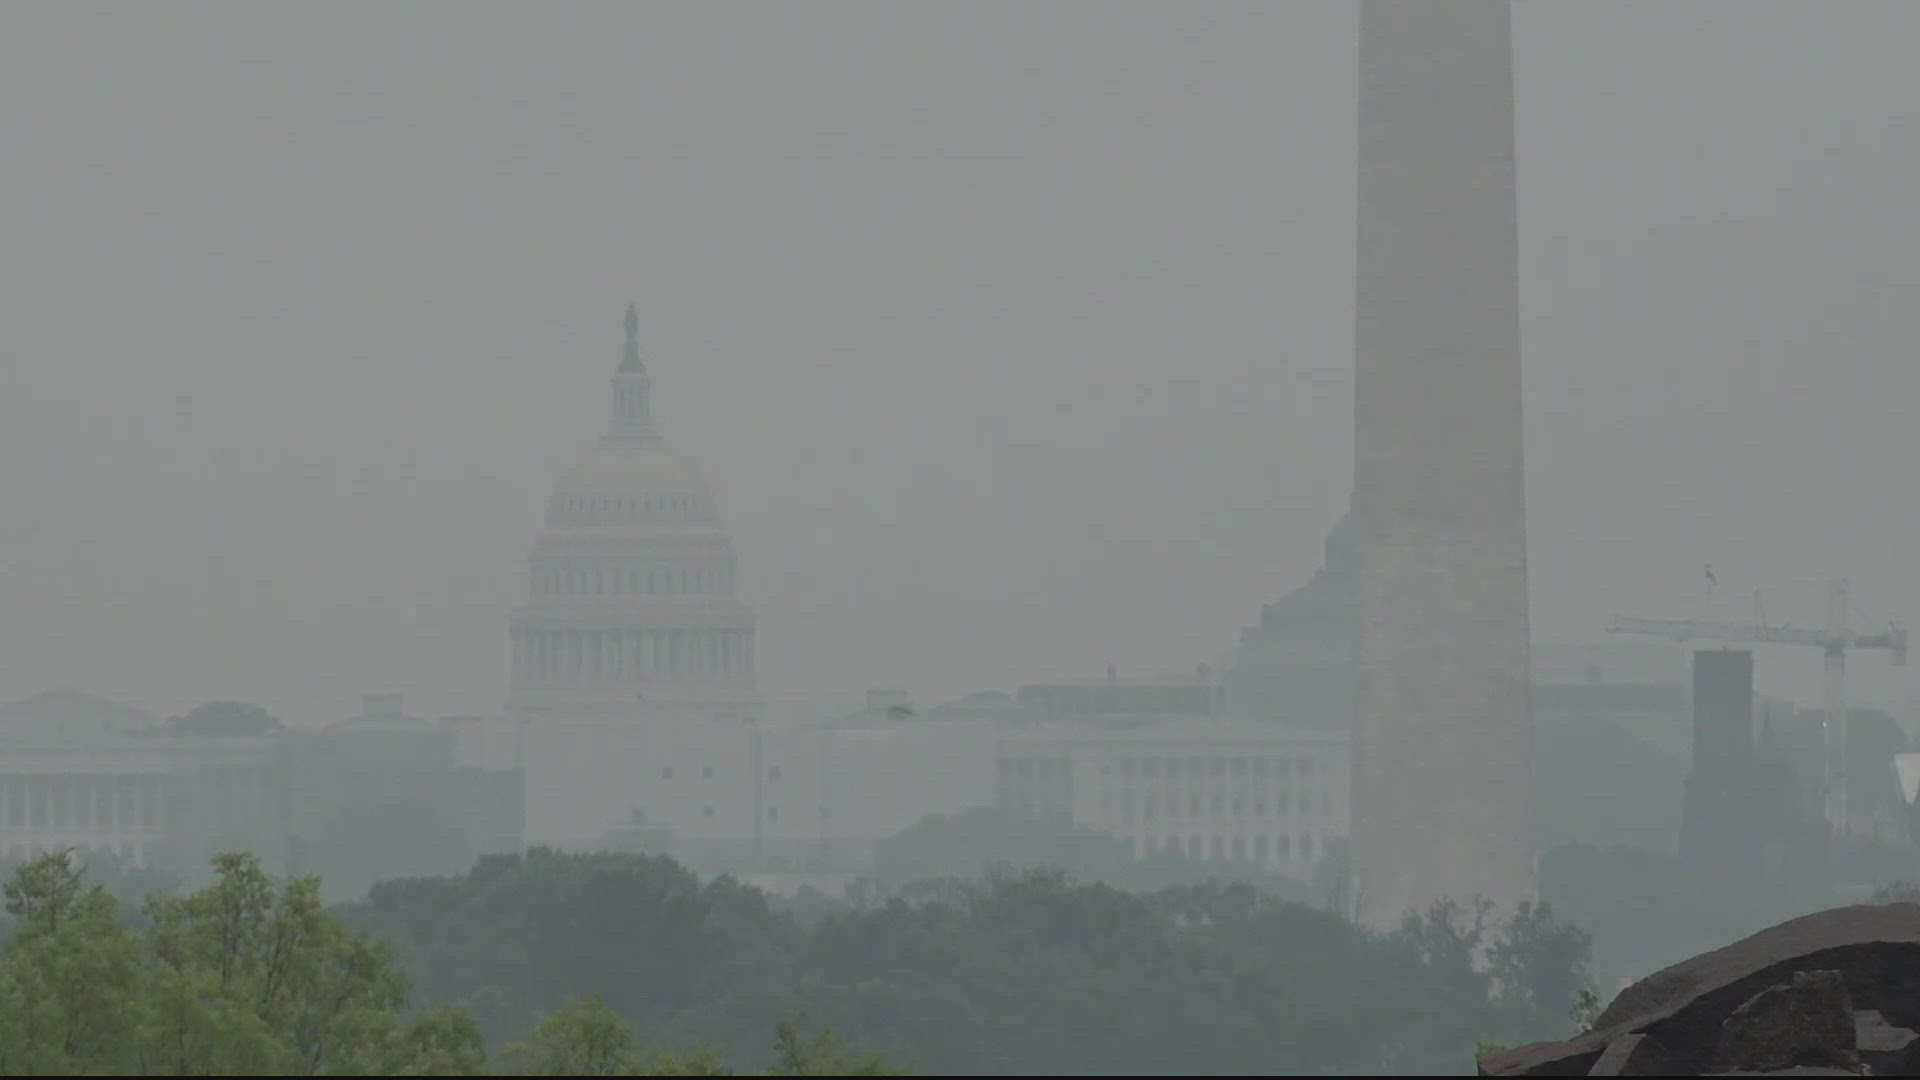 D.C. air quality is once again an issue because of smoke from Canadian wildfires.